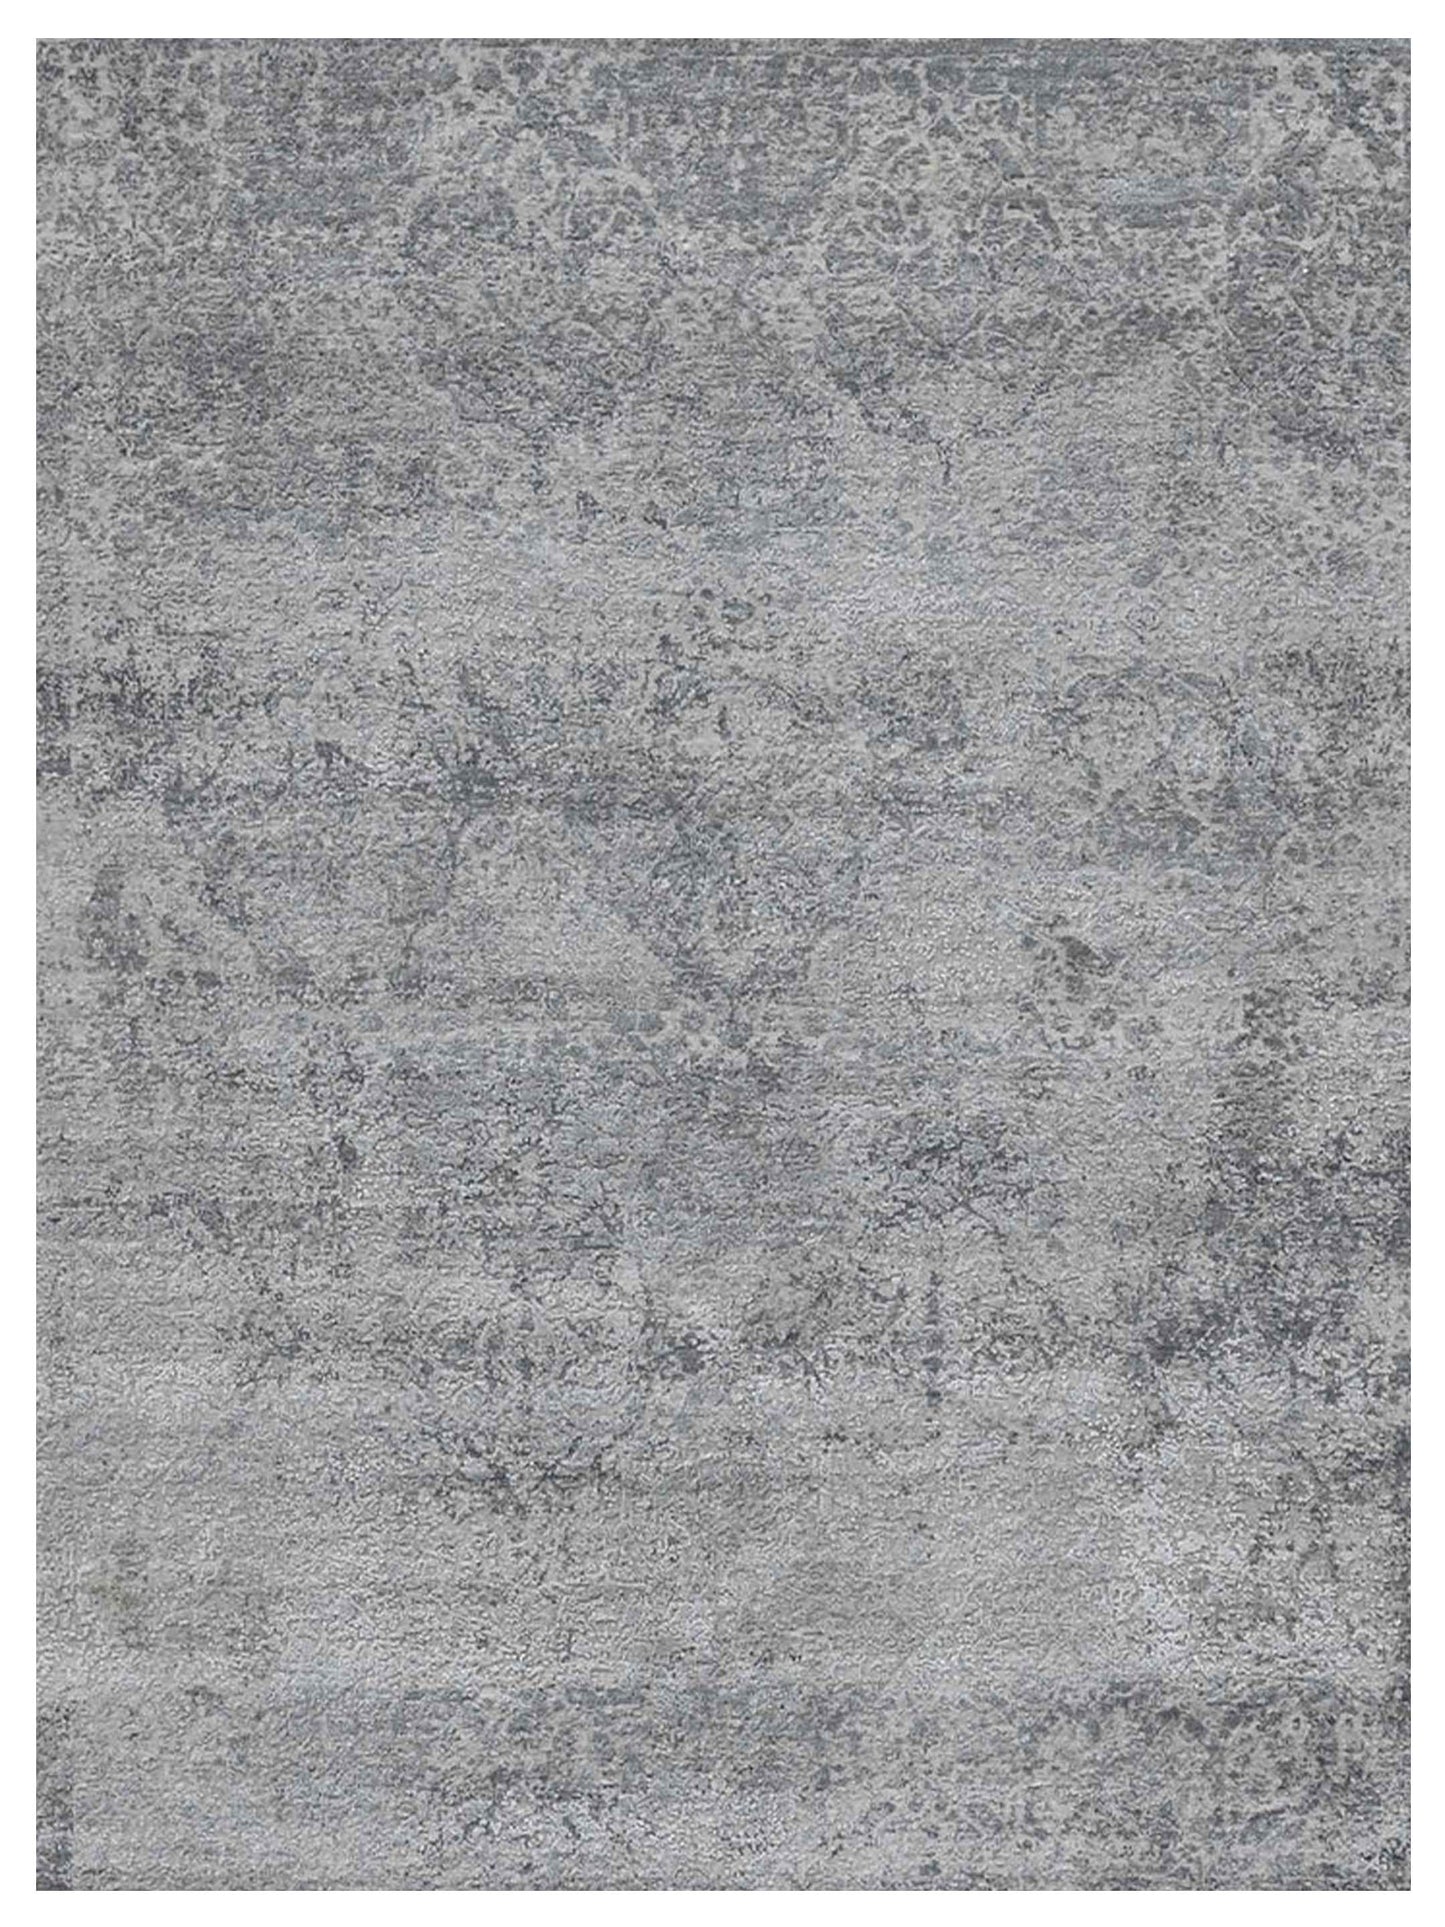 Limited Zelma WI-486 GRAY  Transitional Knotted Rug